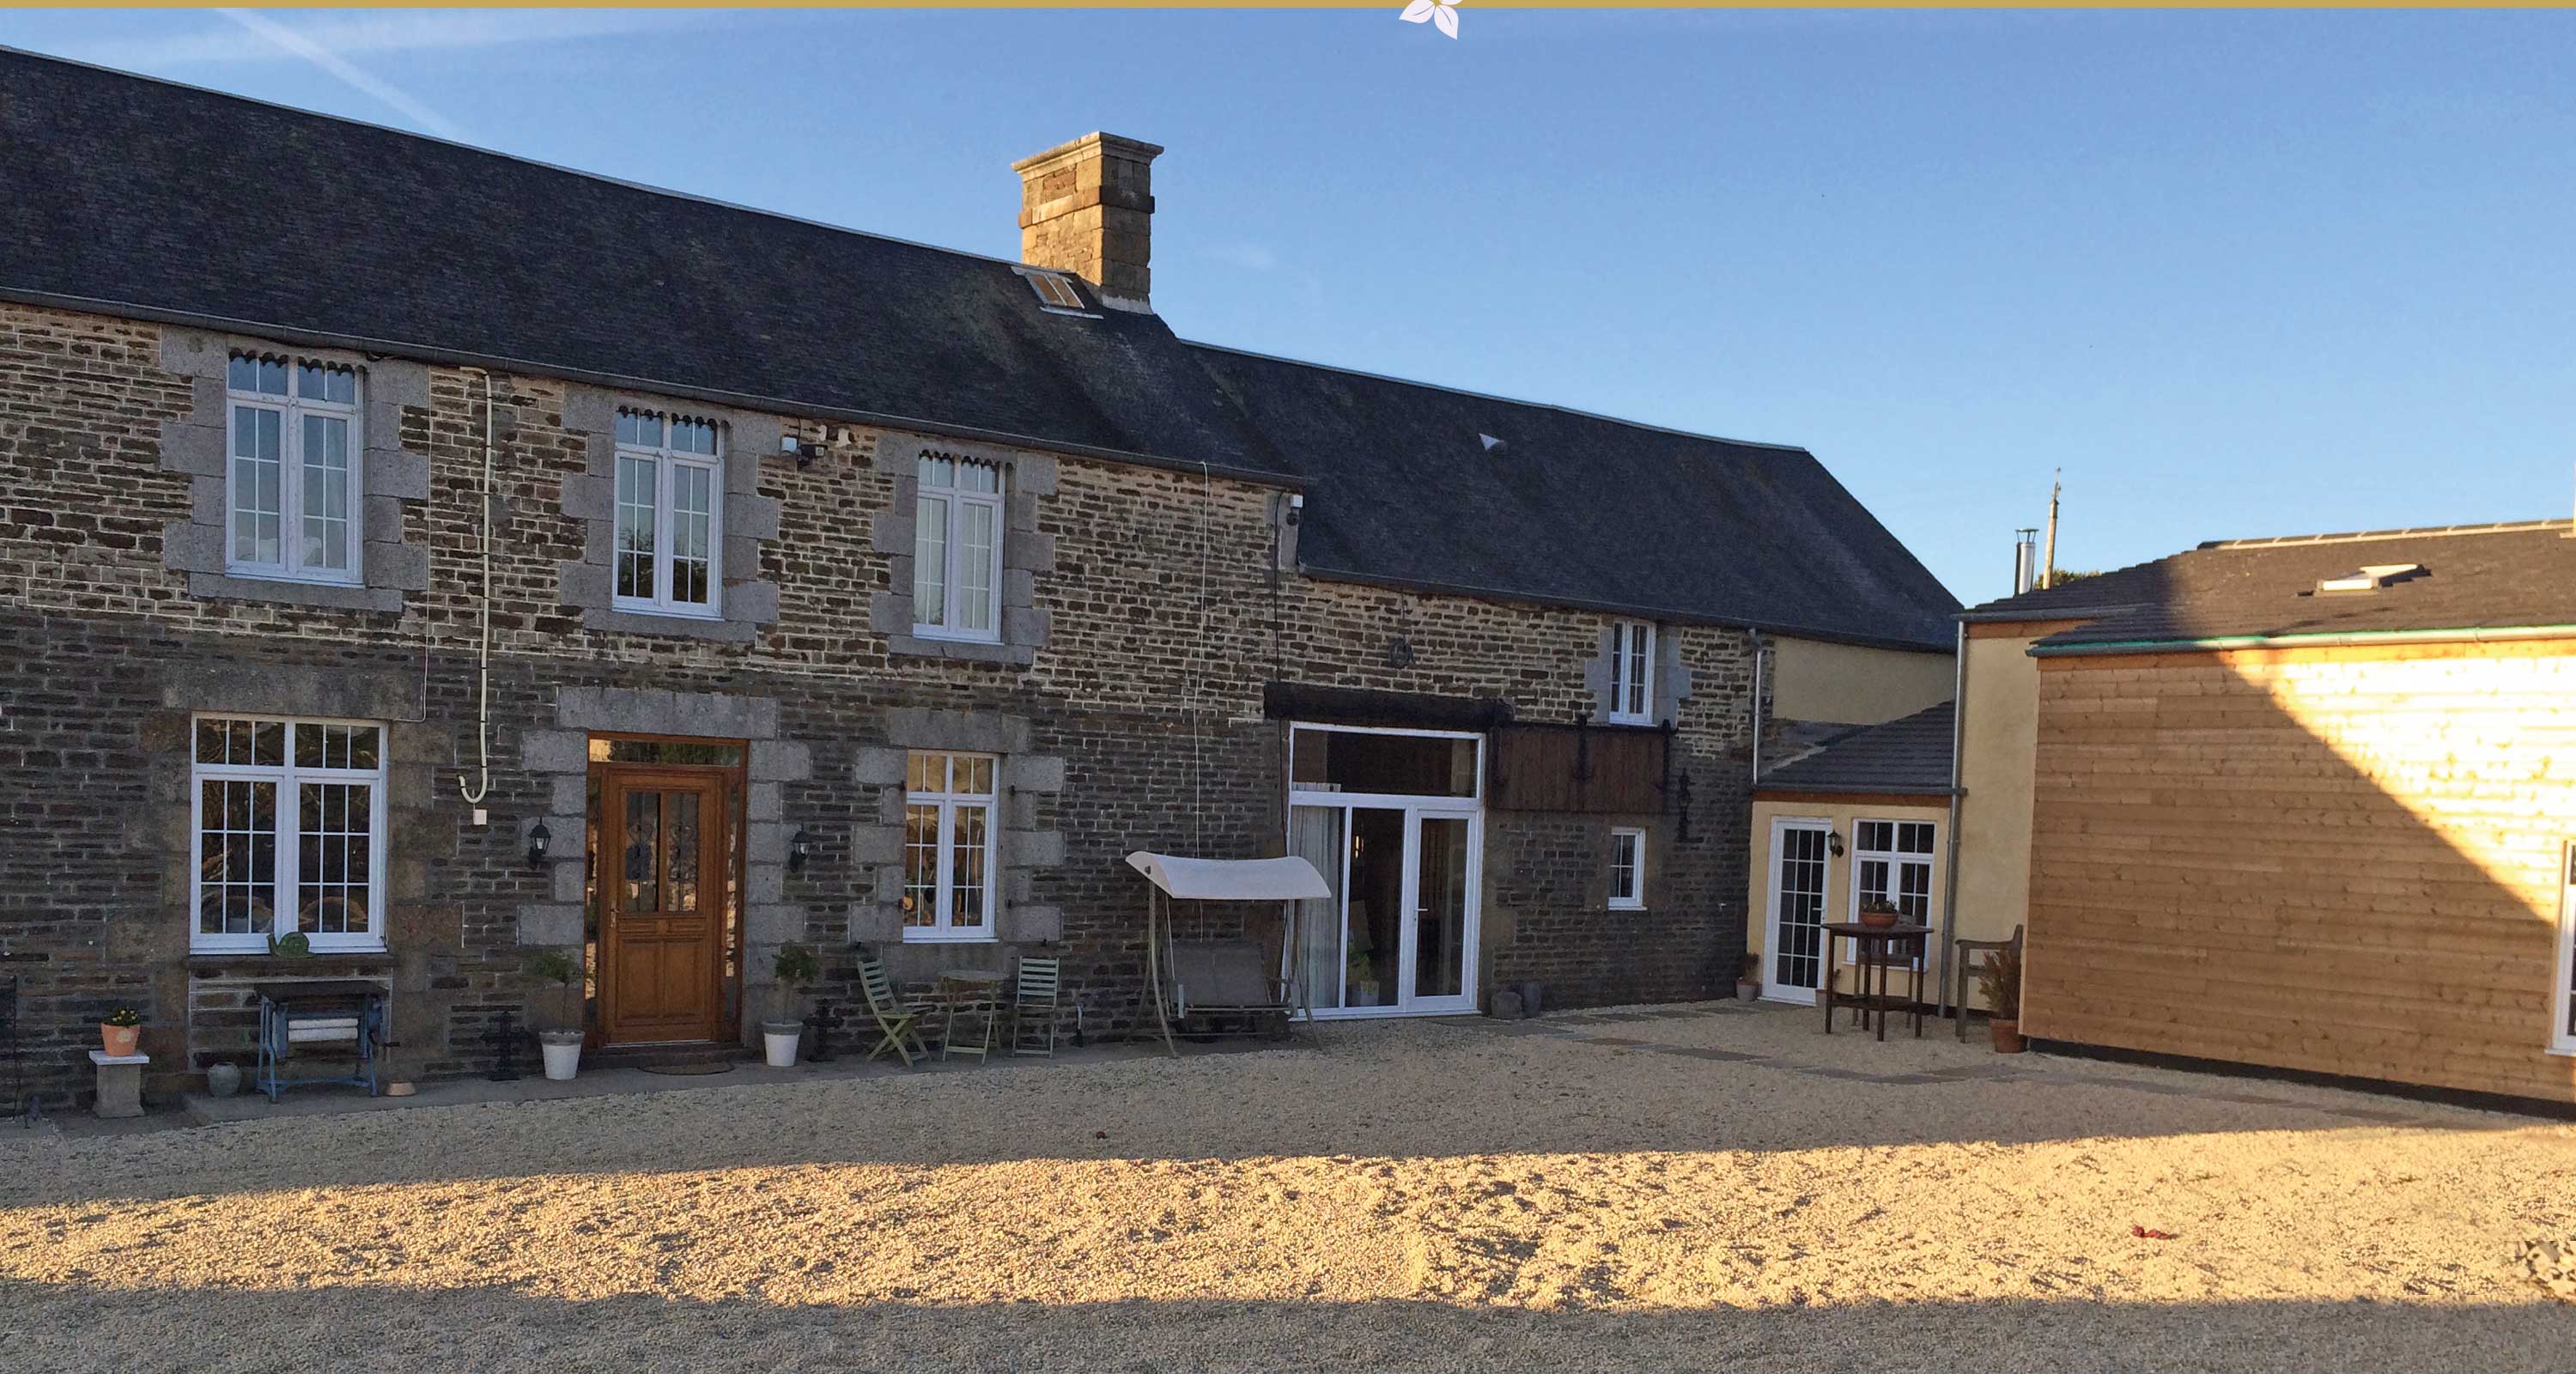 2 and 3 bedroom holiday cottages in Normandy France